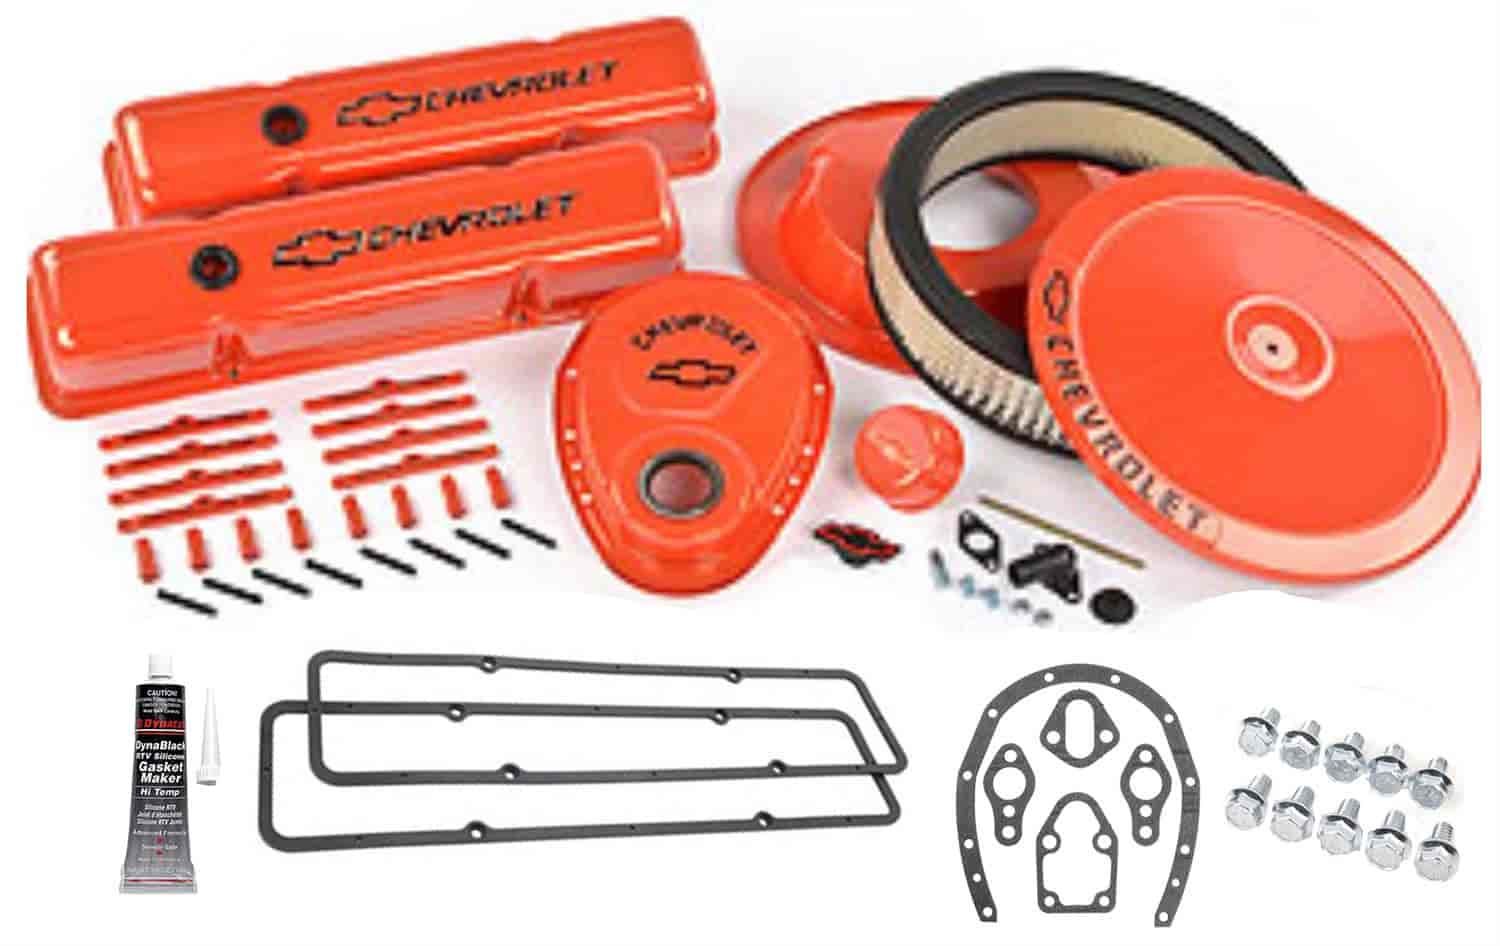 1958-1986 Small Block Chevy Complete Dress-Up Kit in Chevy Orange Finish